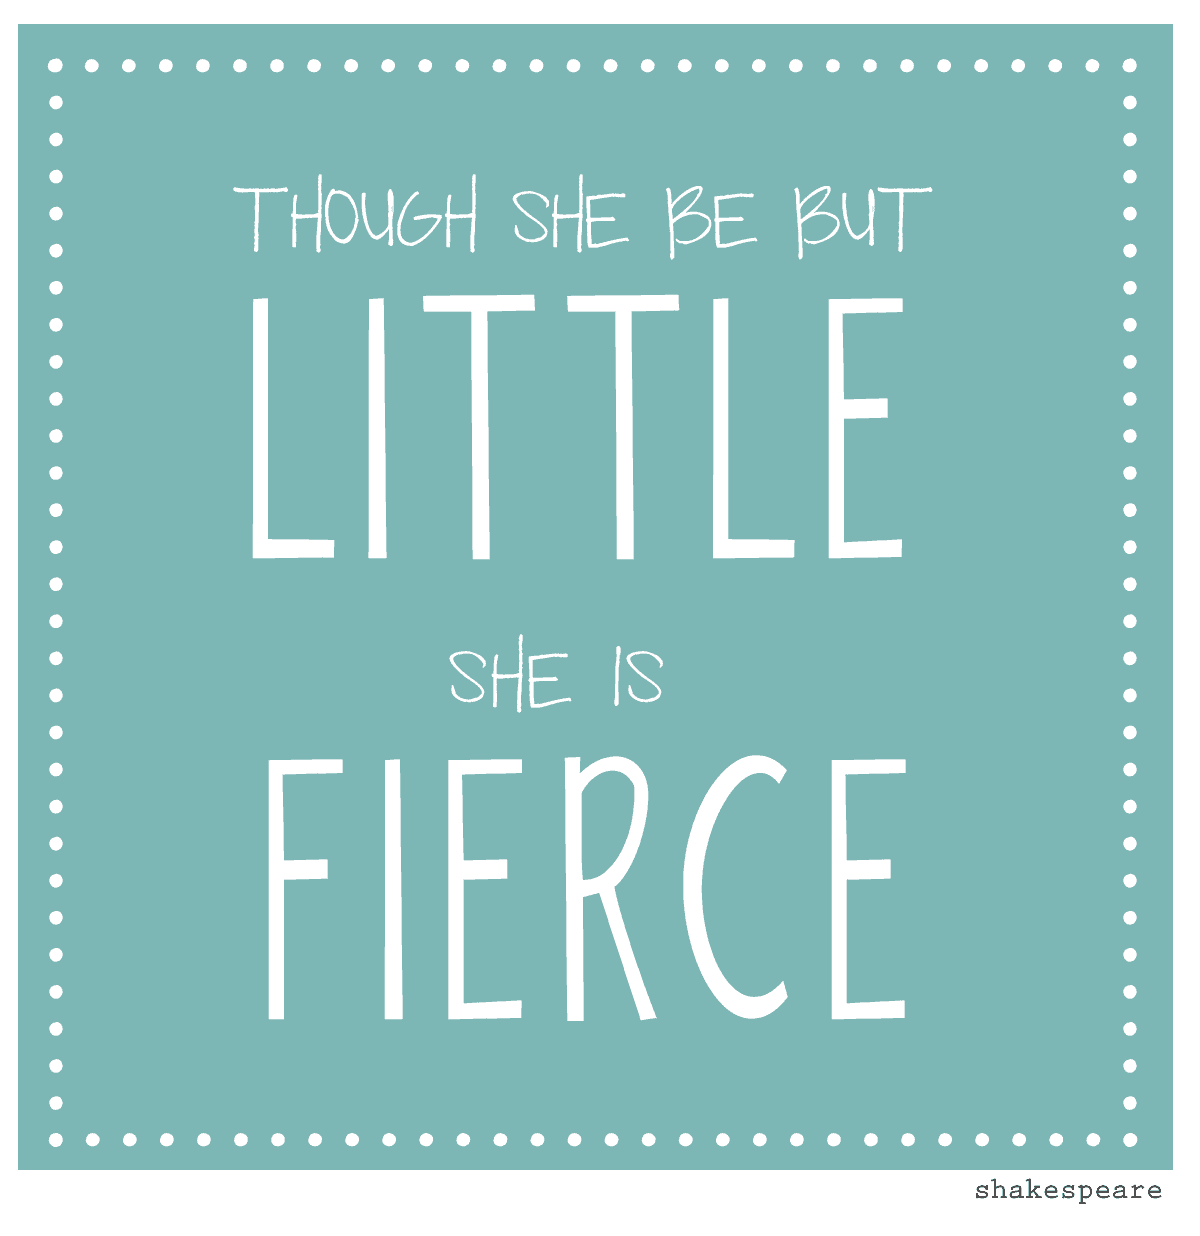 What does “She is Fierce” mean to you?